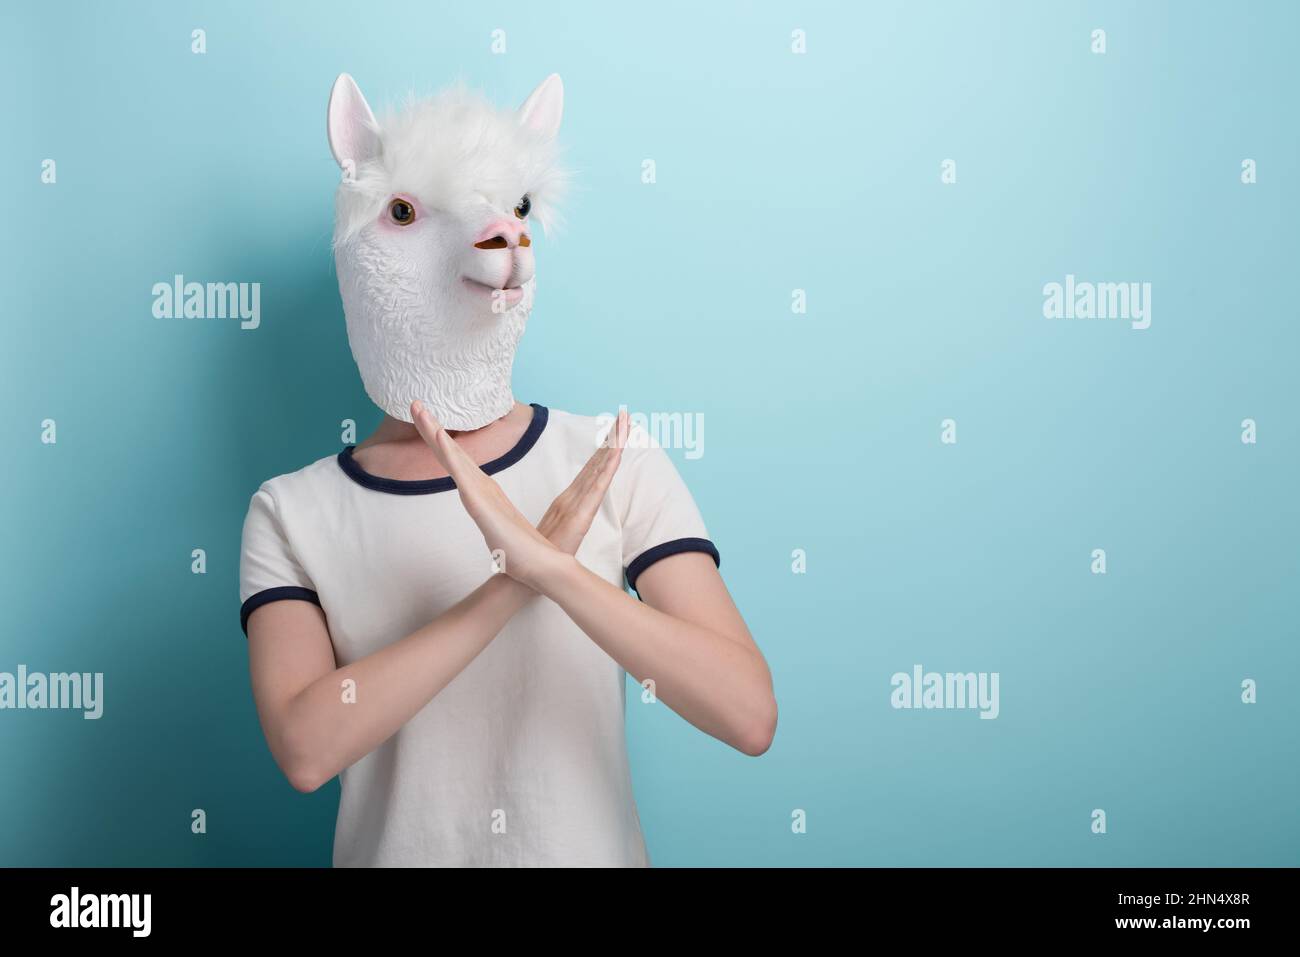 Young woman in alpaca mask hold her hands crossed in stop or cancel sign gesture, isolated on blue background with copy-space. Stock Photo